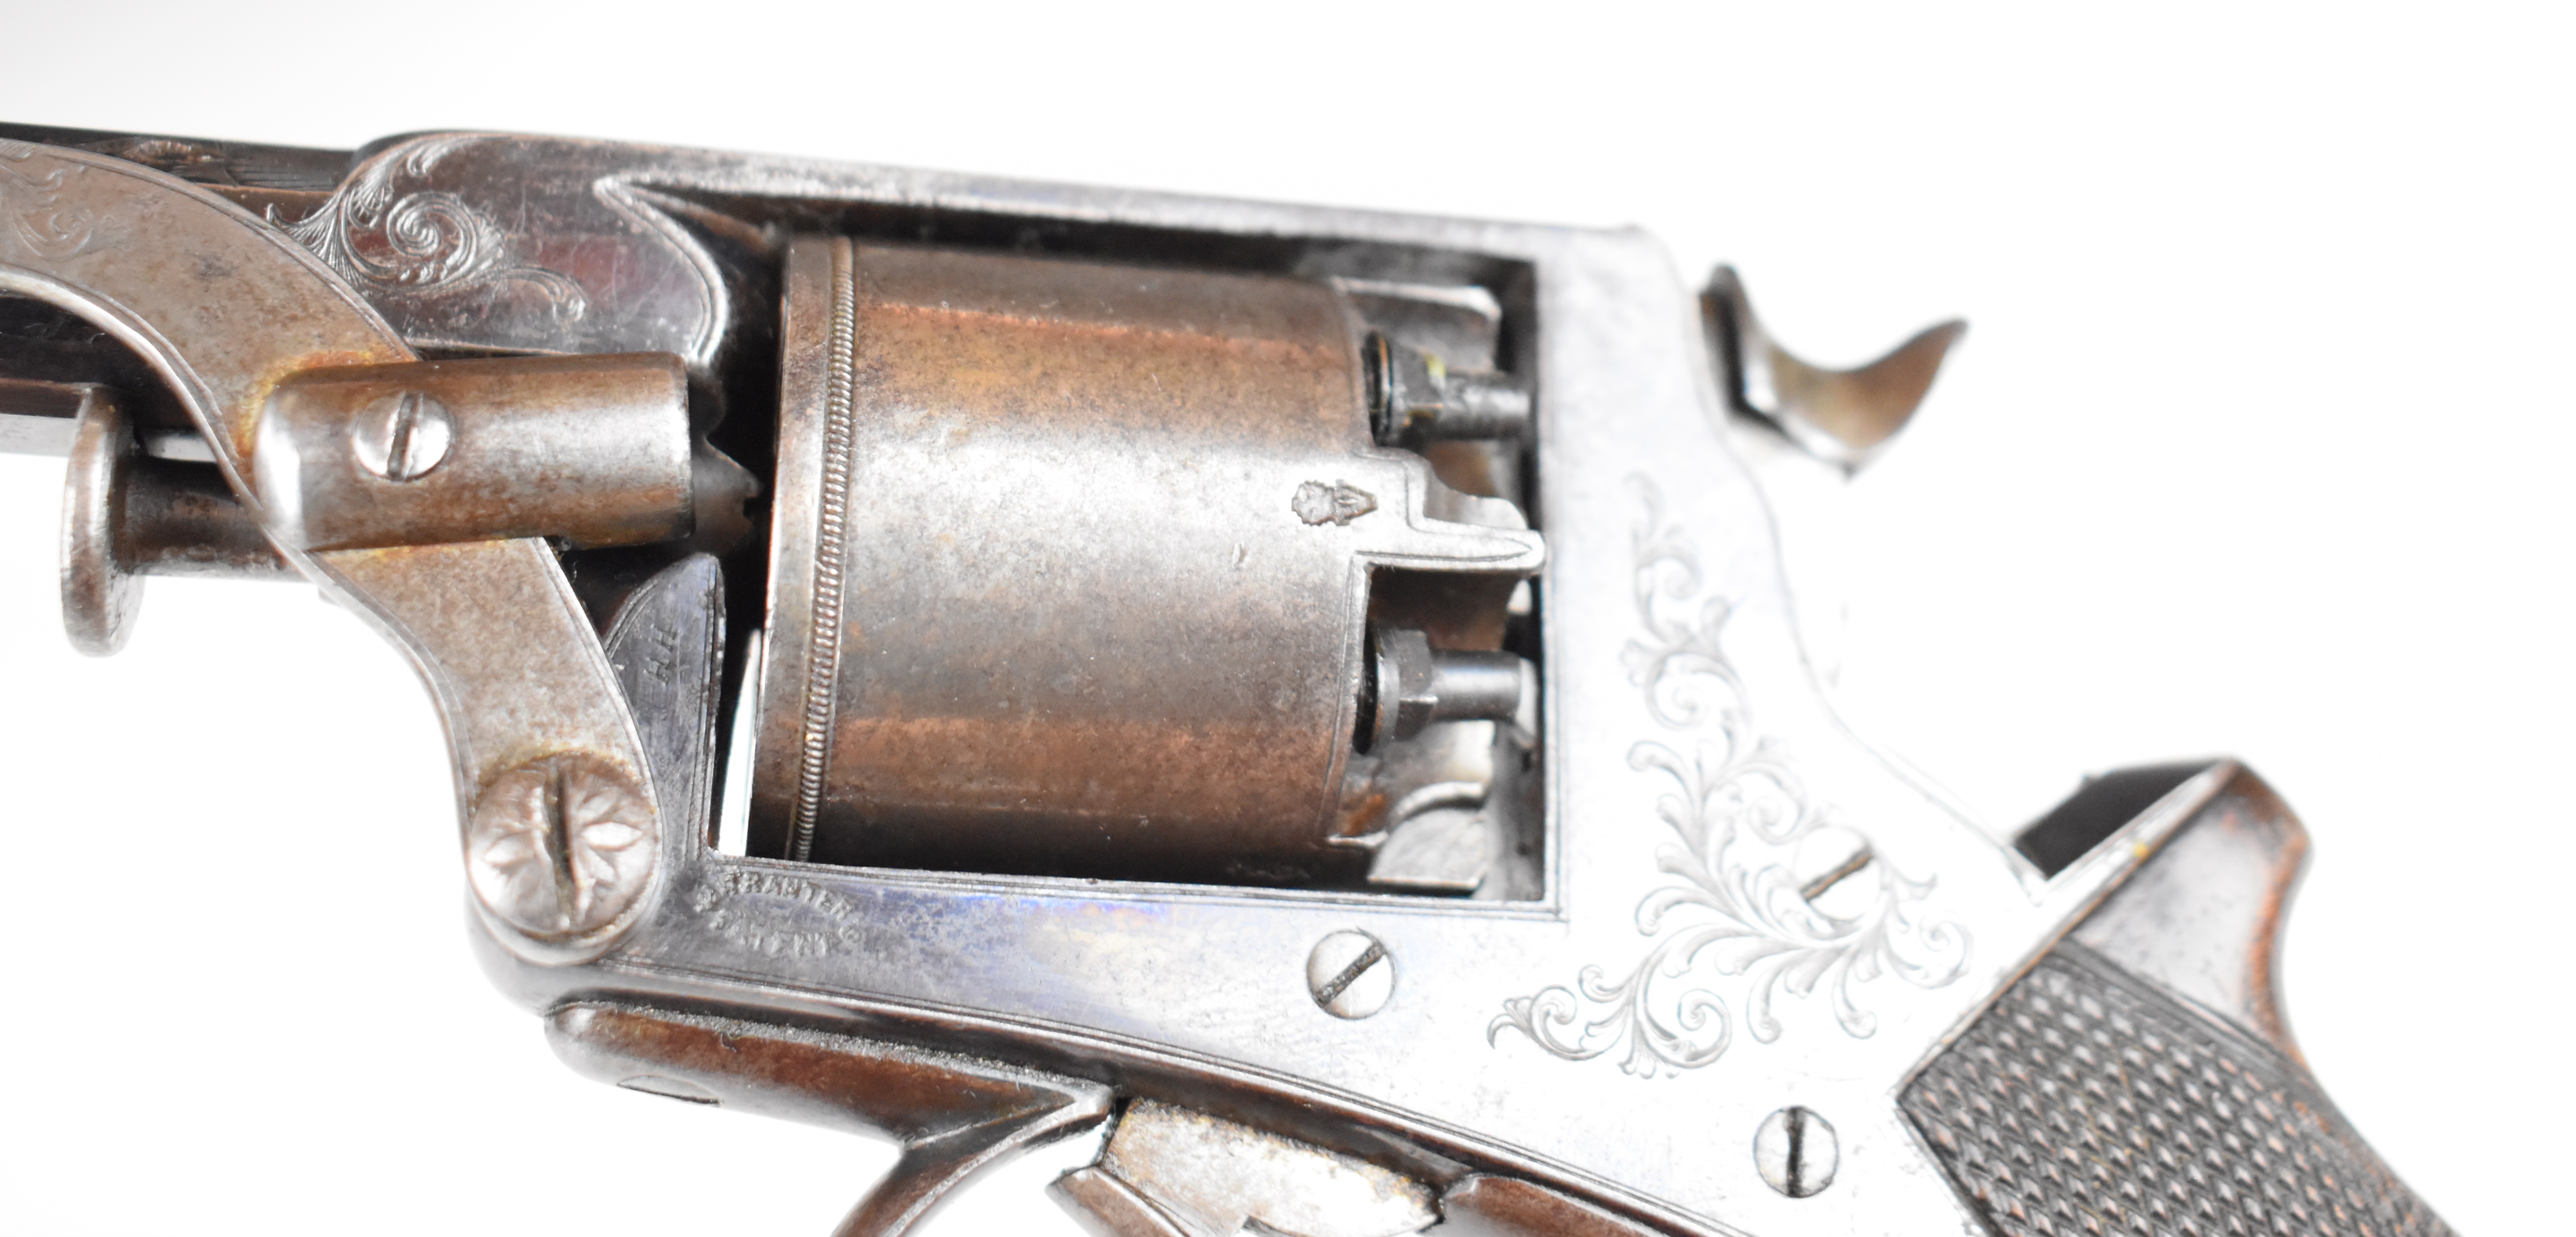 William Tranter's Patent 120 bore five-shot double-action revolver with engraved trigger guard, - Image 17 of 19